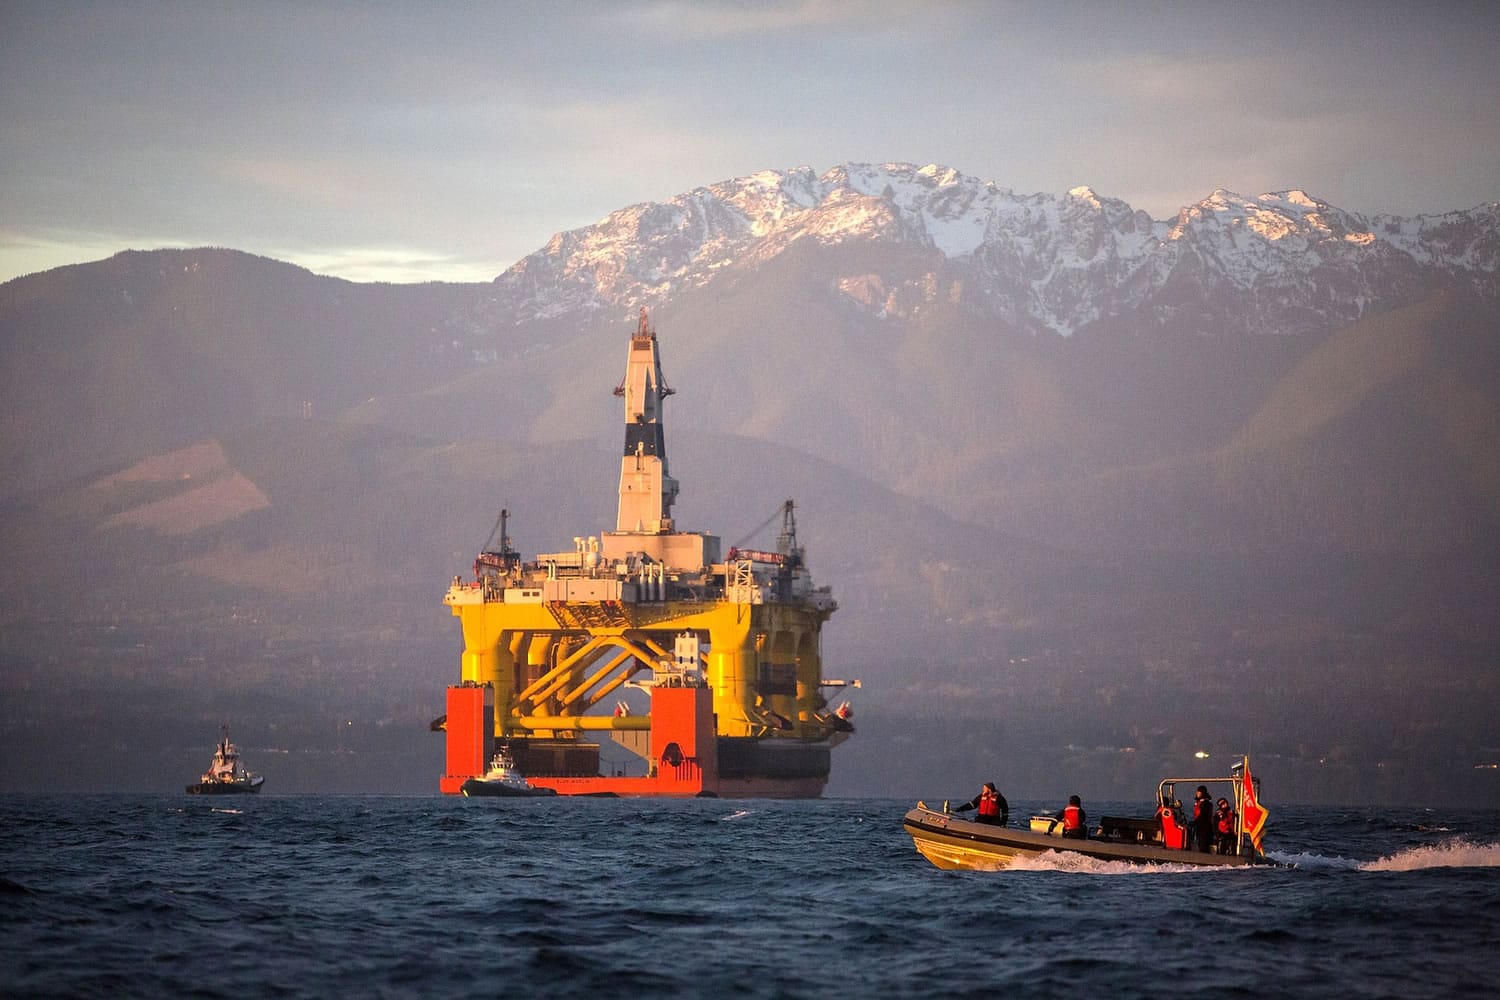 FILE - In this April 17, 2015 file photo, with the Olympic Mountains in the background, a small boat crosses in front of the Transocean Polar Pioneer, a semi-submersible drilling unit that Royal Dutch Shell leases from Transocean Ltd., as it arrives in Port Angeles, Wash., aboard a transport ship after traveling across the Pacific before its eventual Arctic destination. The U.S. government on Monday gave Shell the final permit it needs to drill for oil in the Arctic Ocean off Alaska's northwest coast for the first time in more than two decades.